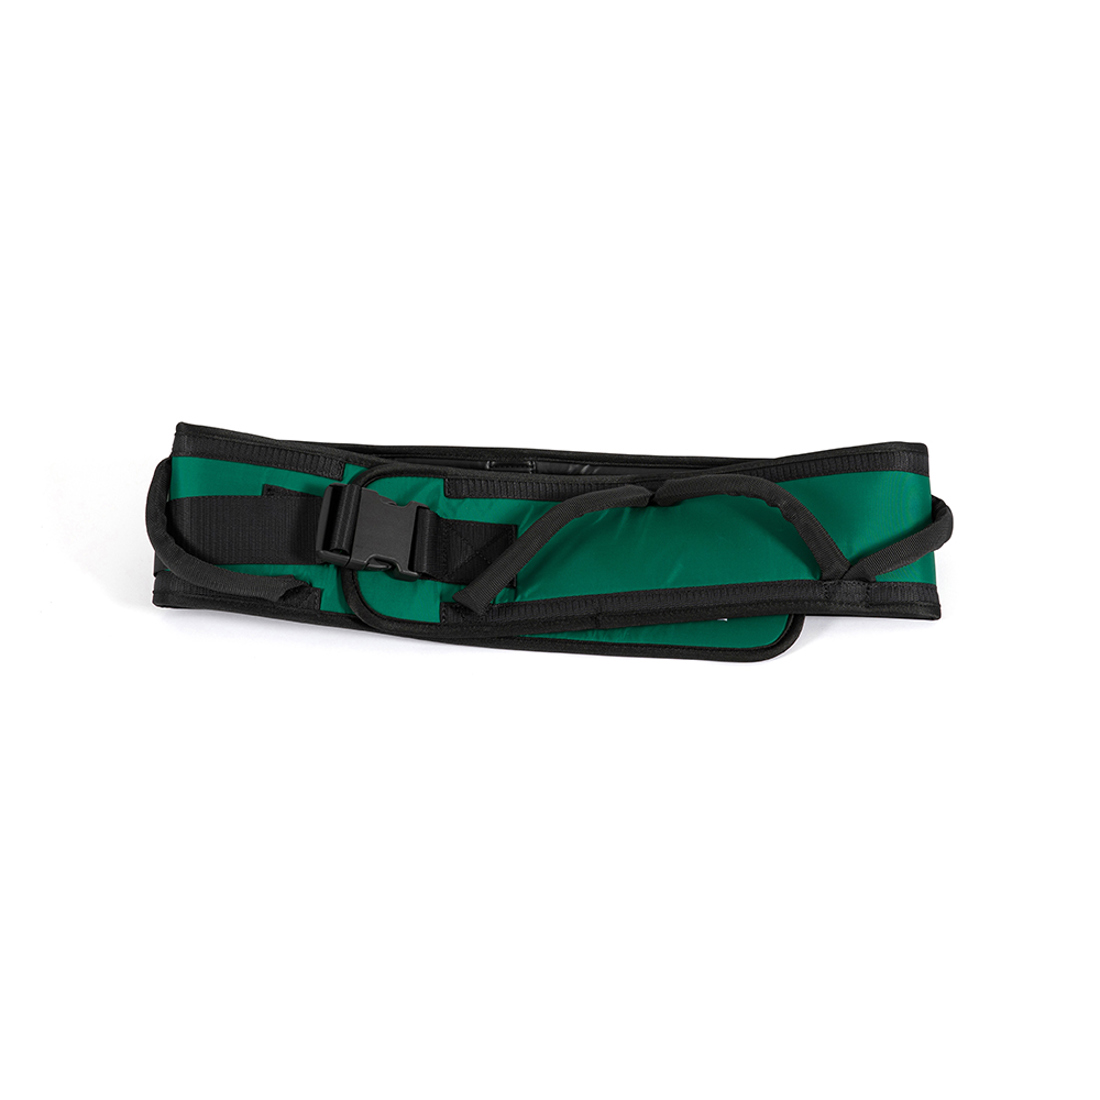 Immedia SupportBelt has diagonally placed handles that allows the caregiver to maintain a more ergonomic grip.